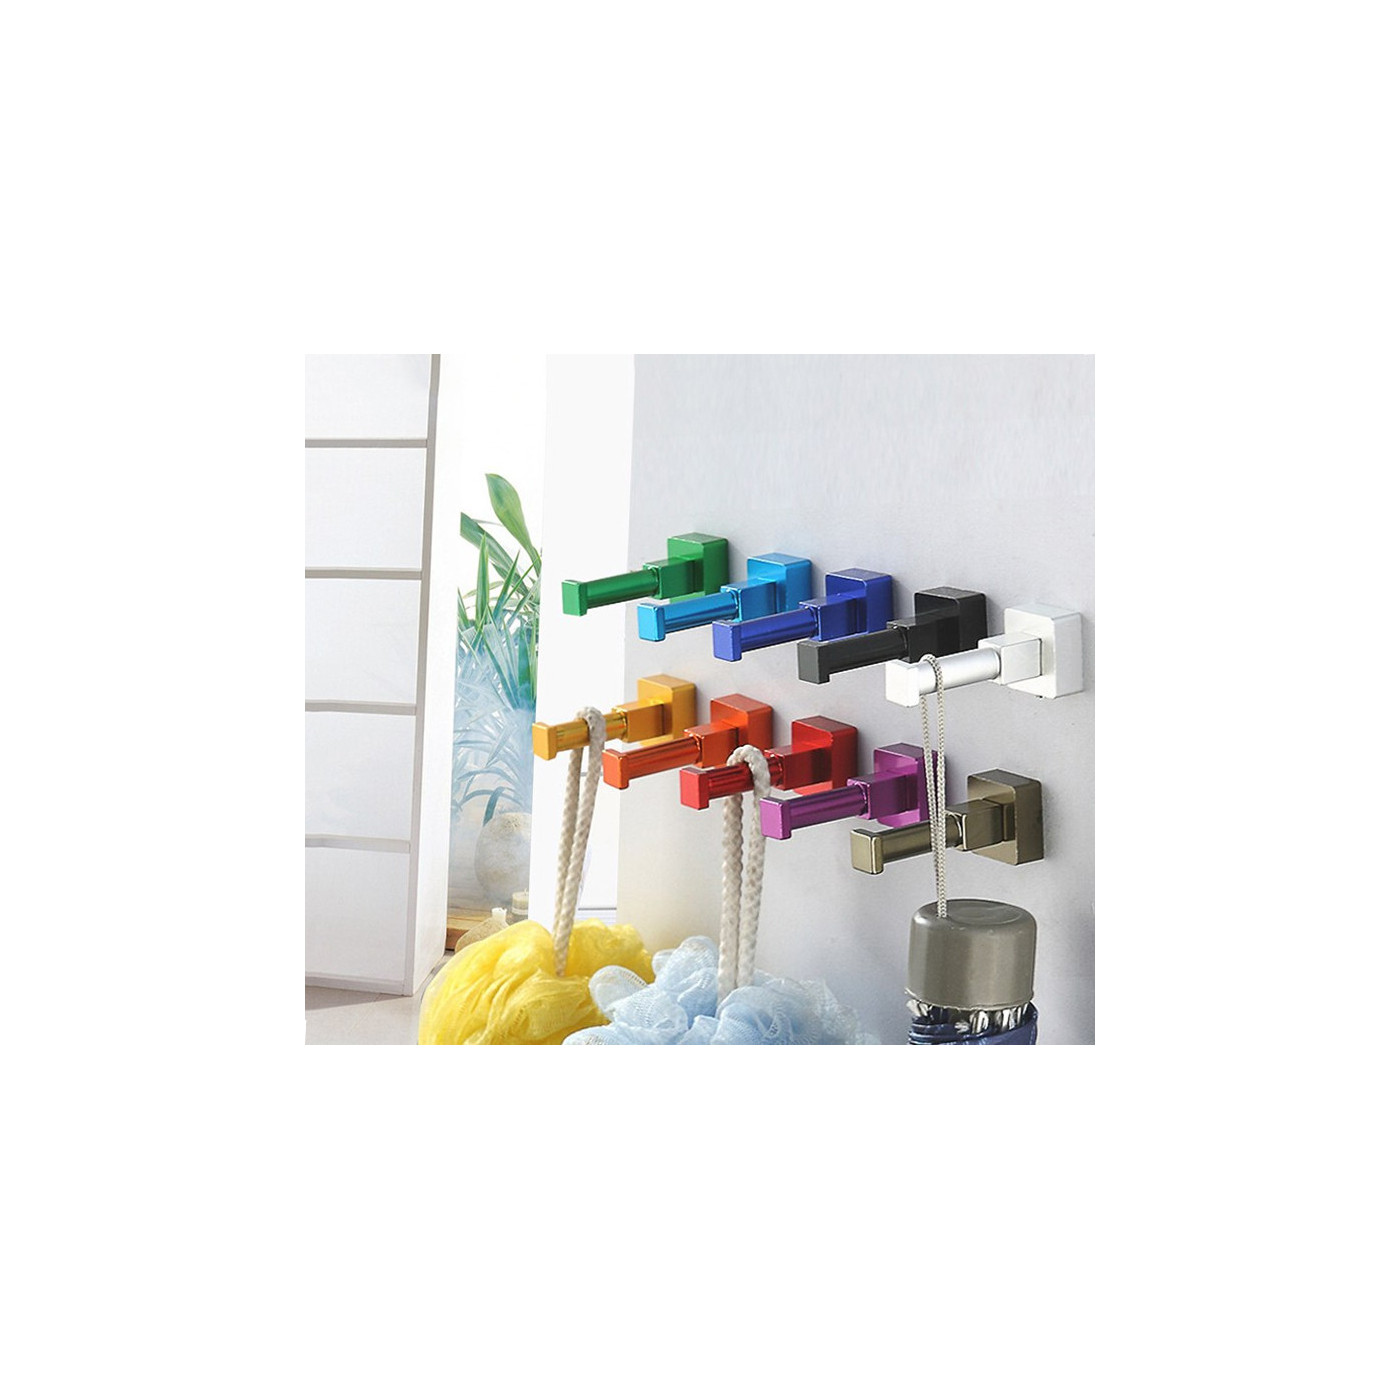 Set of 10 metal clothes hooks (colorful mix, square)